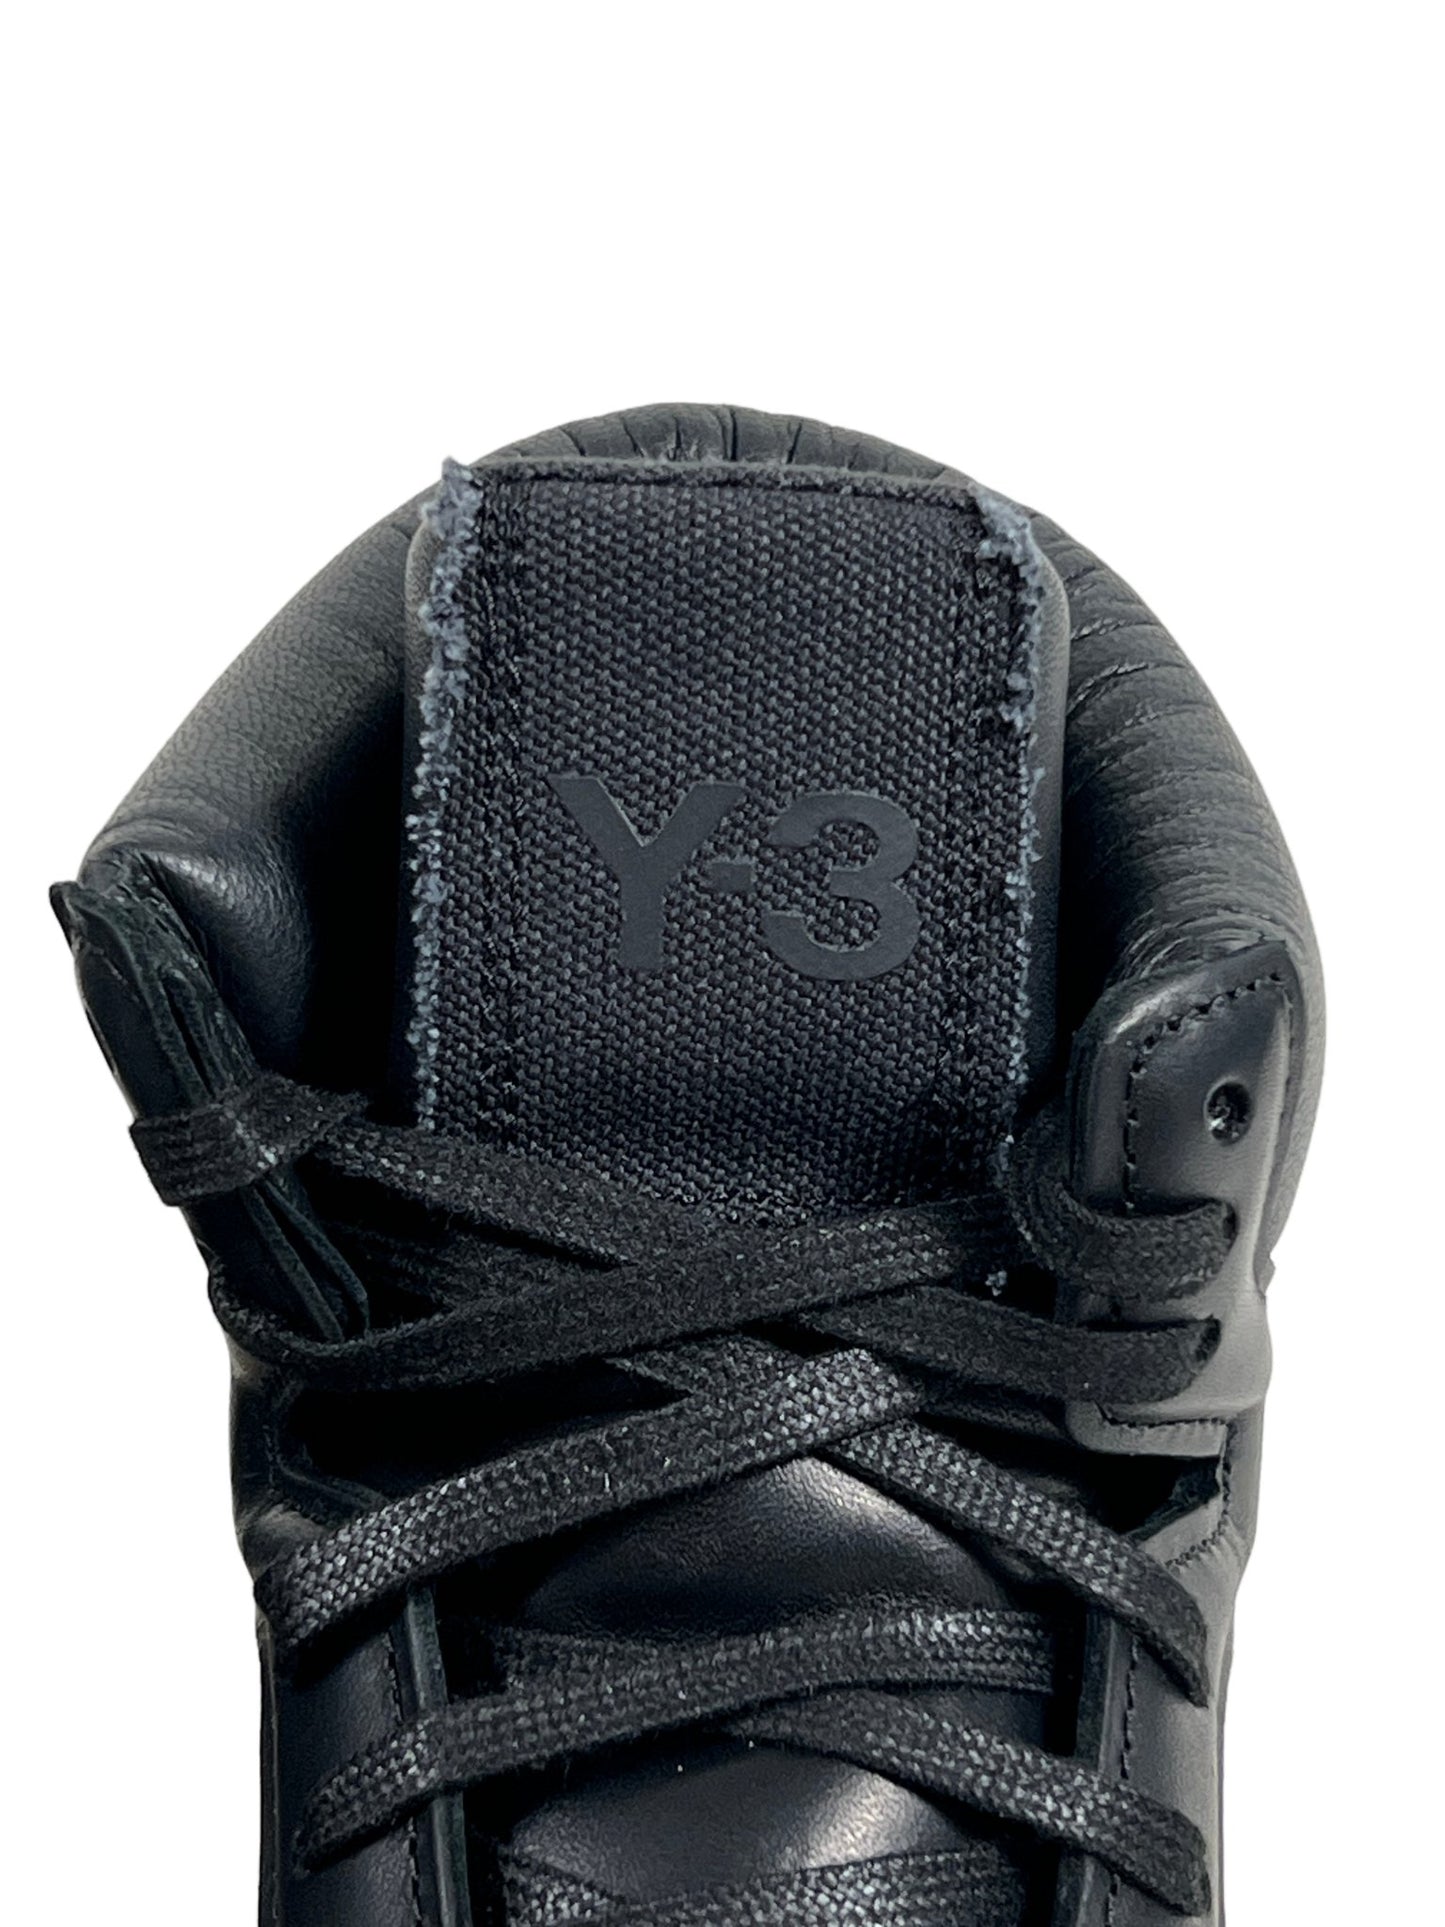 The back of a black, leather ADIDAS x Y-3 sneaker with a logo on it.